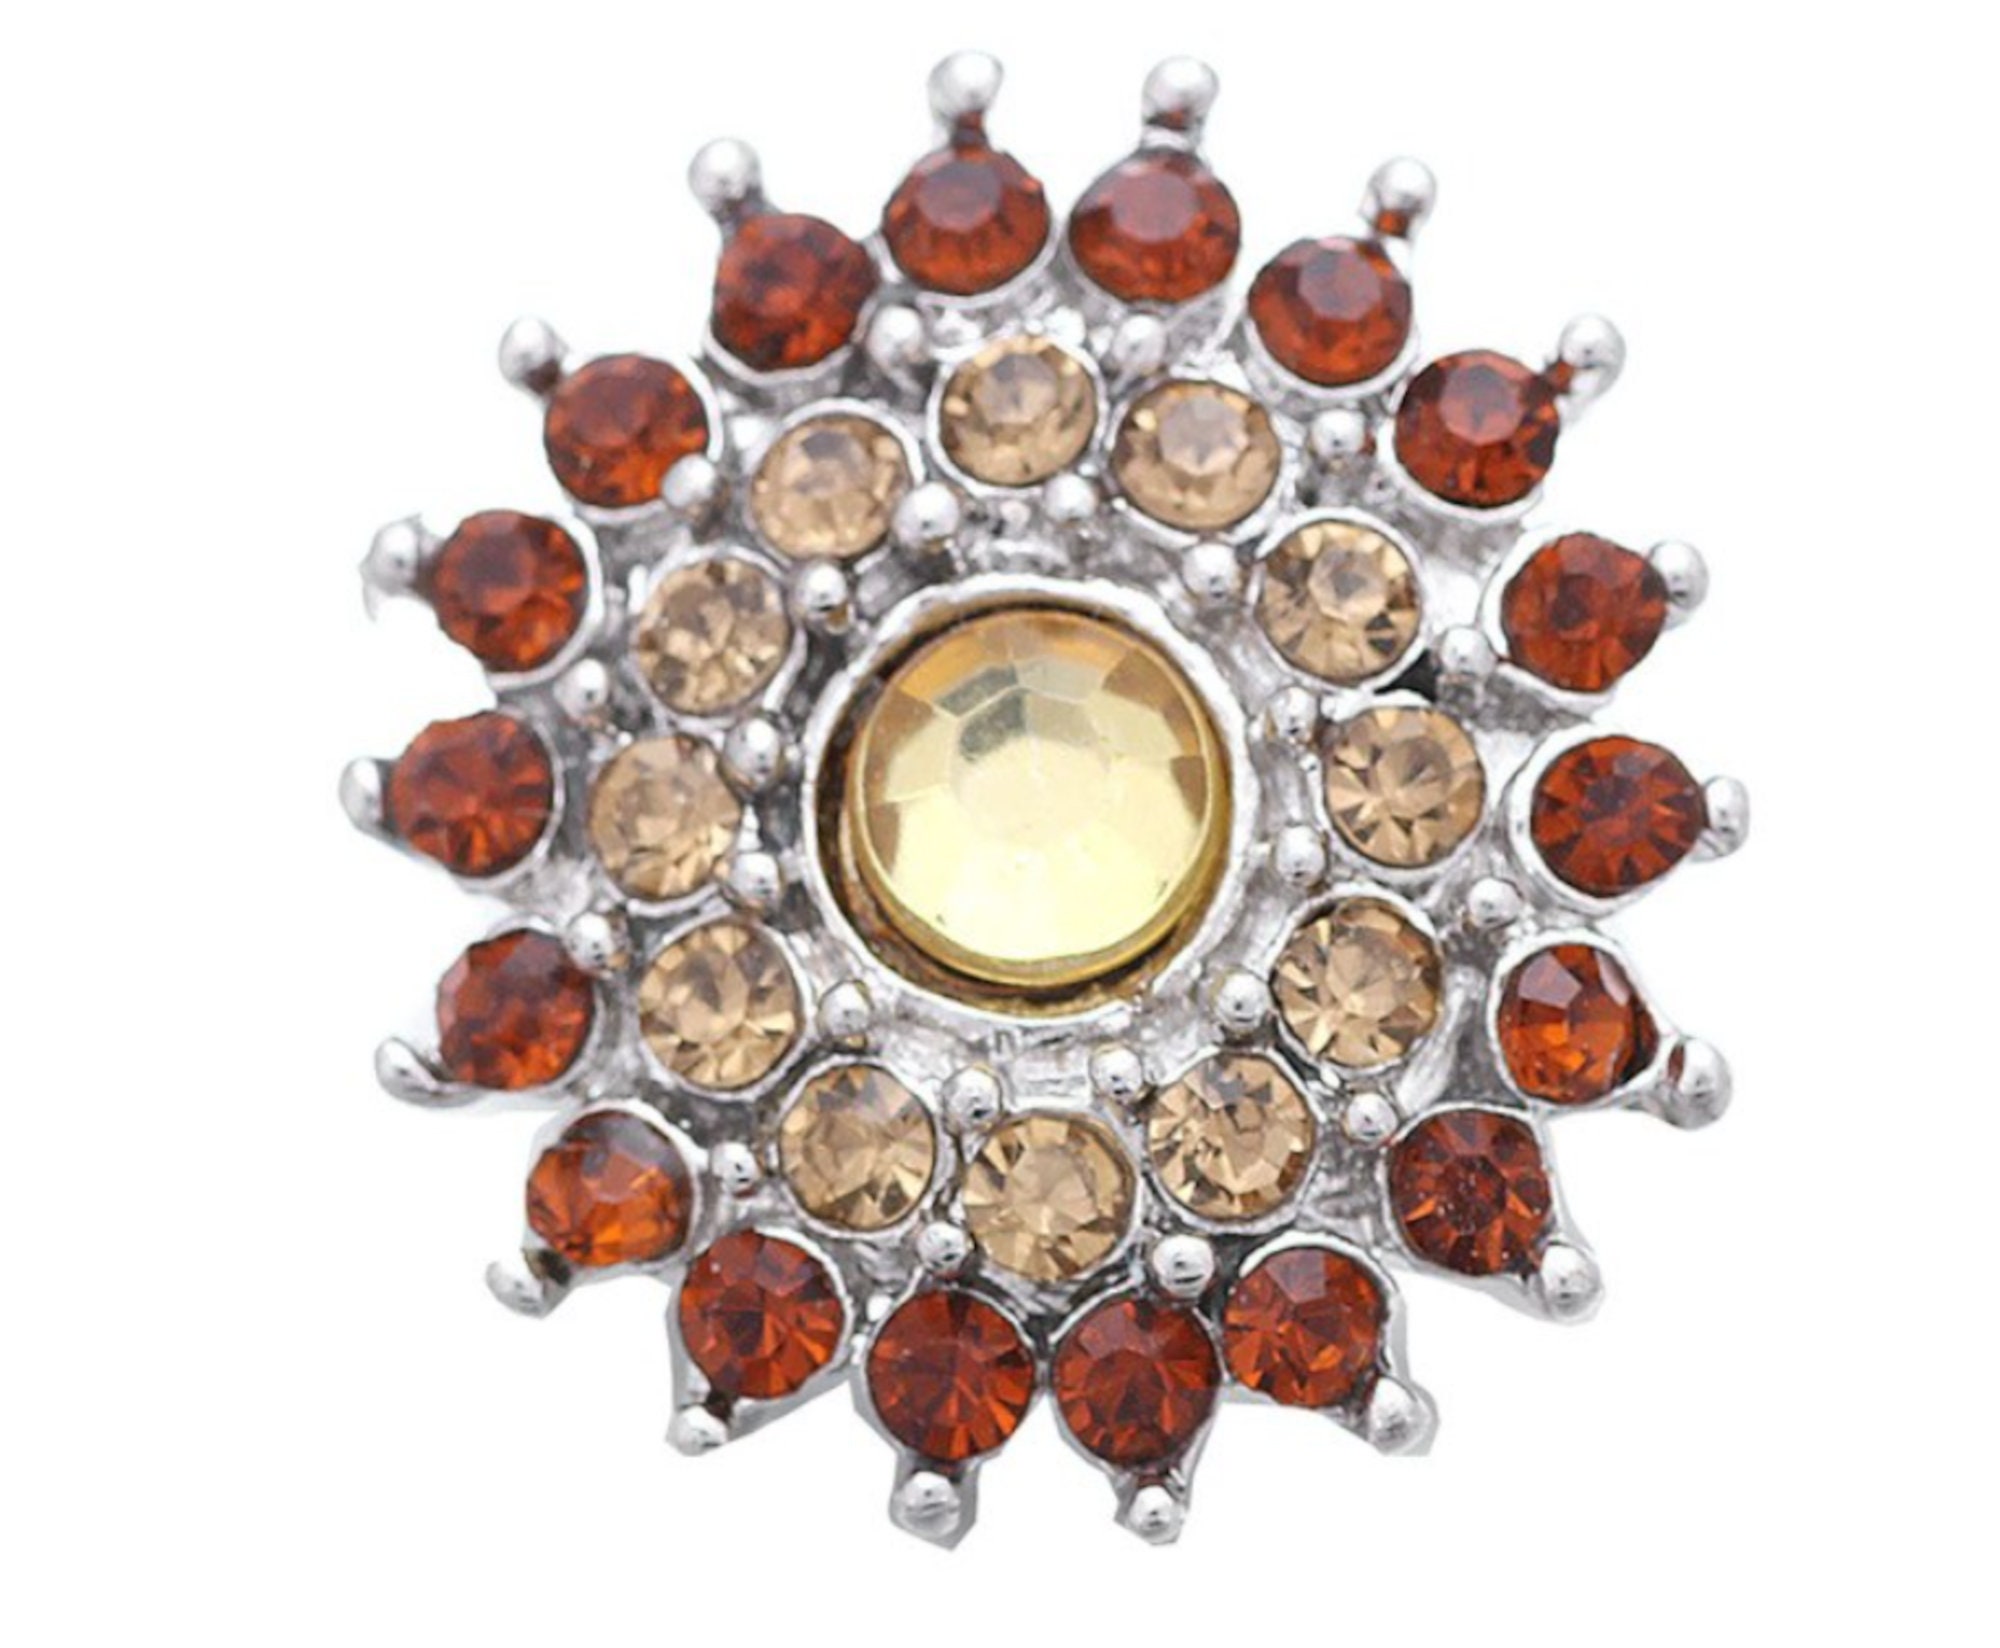 Crystal Snap Button Interchangeable Jewelry 18-22 mm Snap Jewelry Noosa Magnolia & Vine Ginger Snaps Chunk Snap